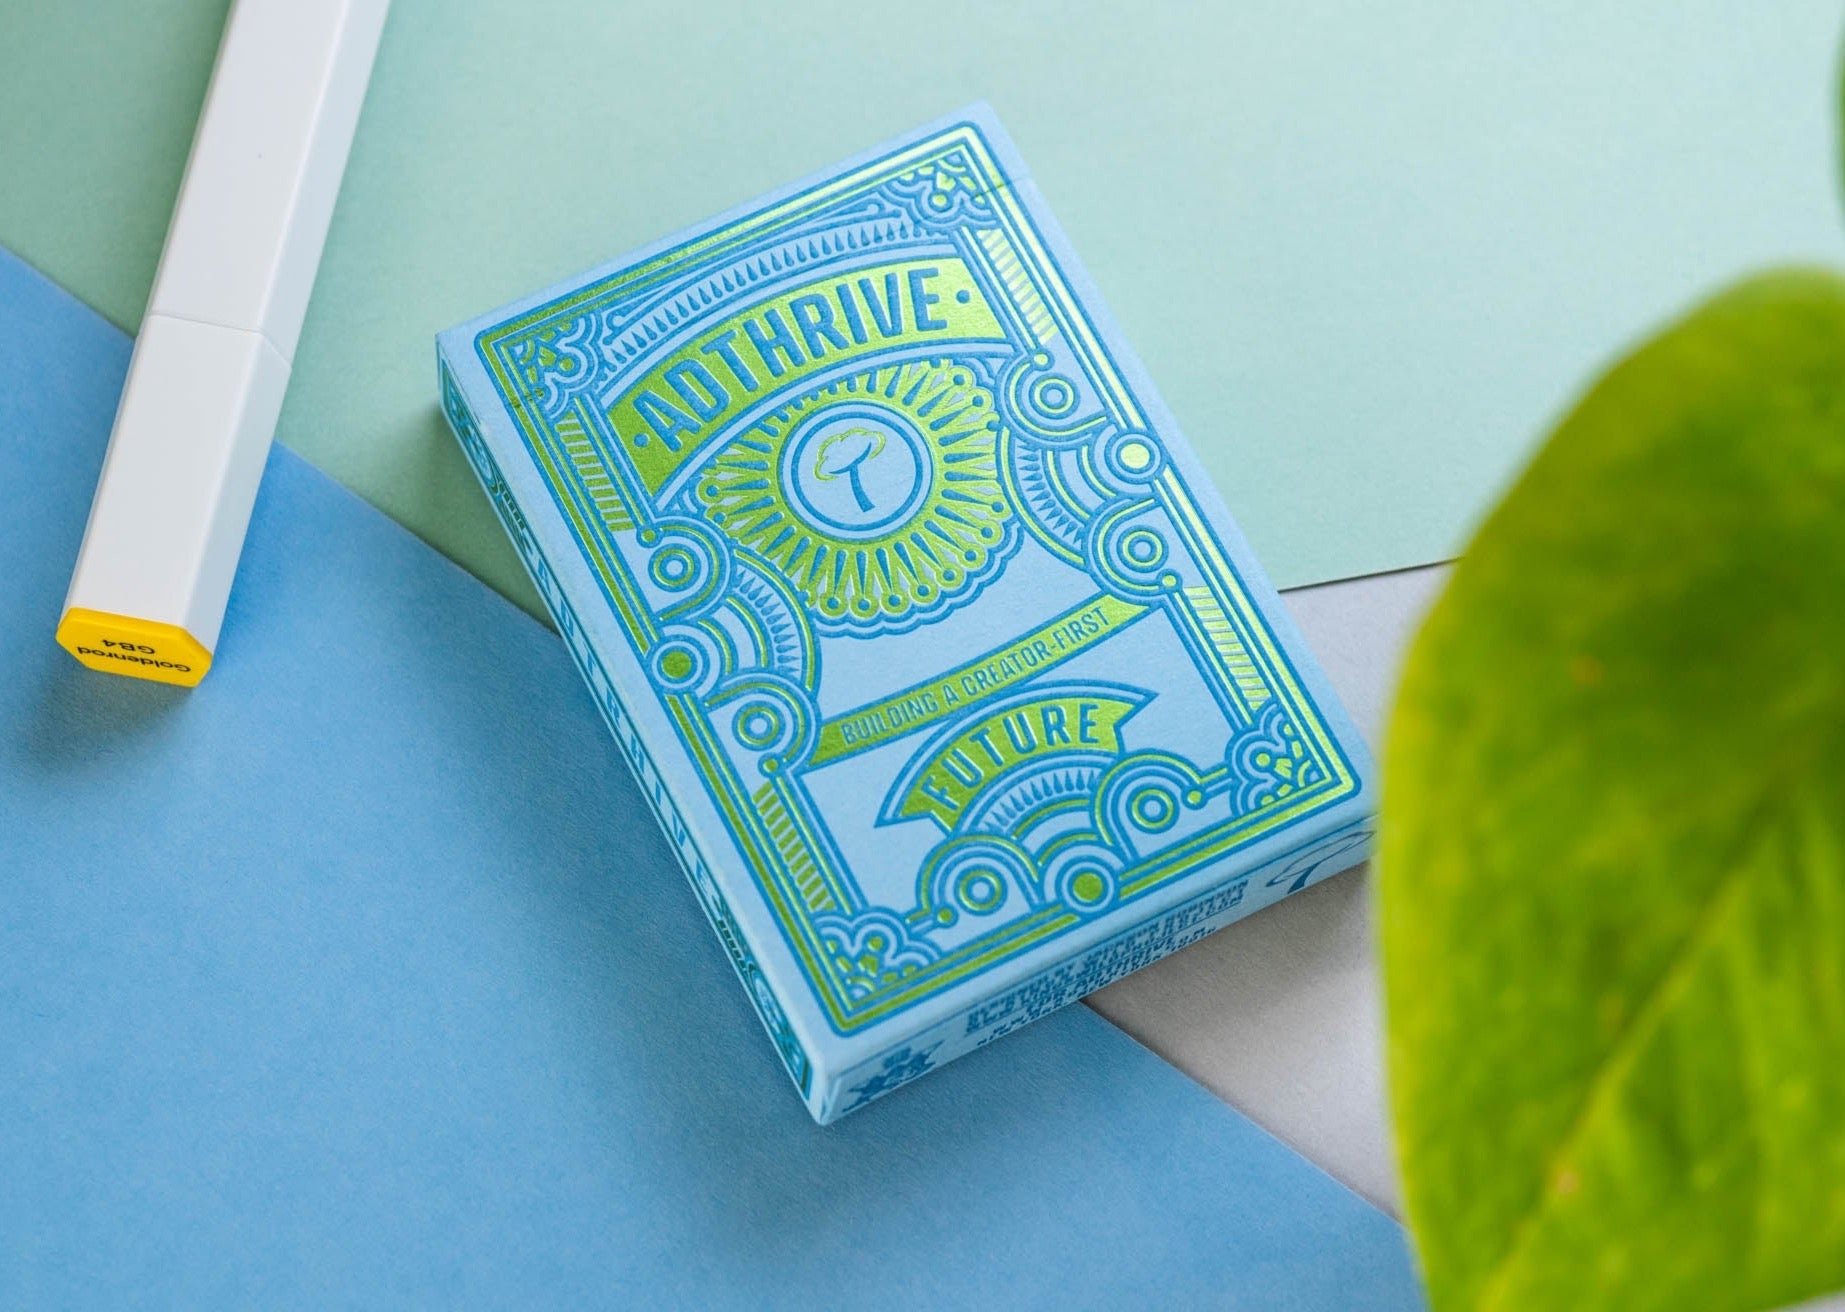 AdThrive Luxury Playing Cards